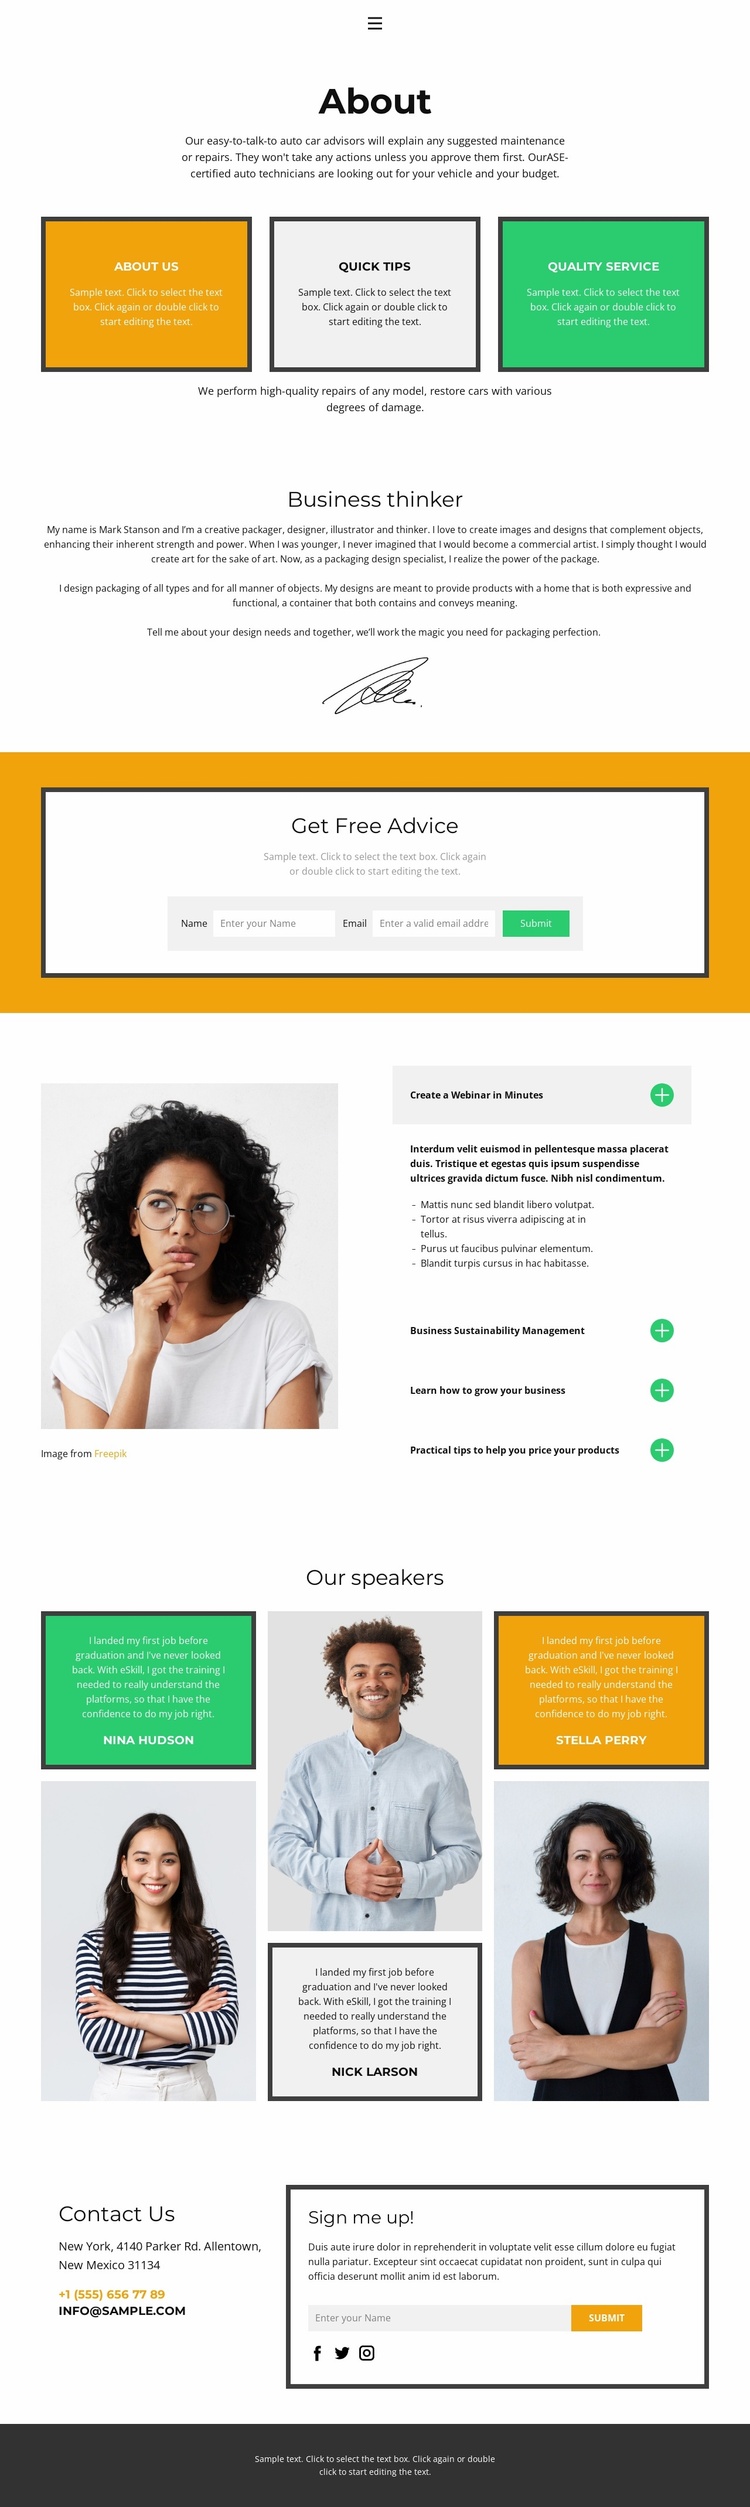 Read and find answers eCommerce Template